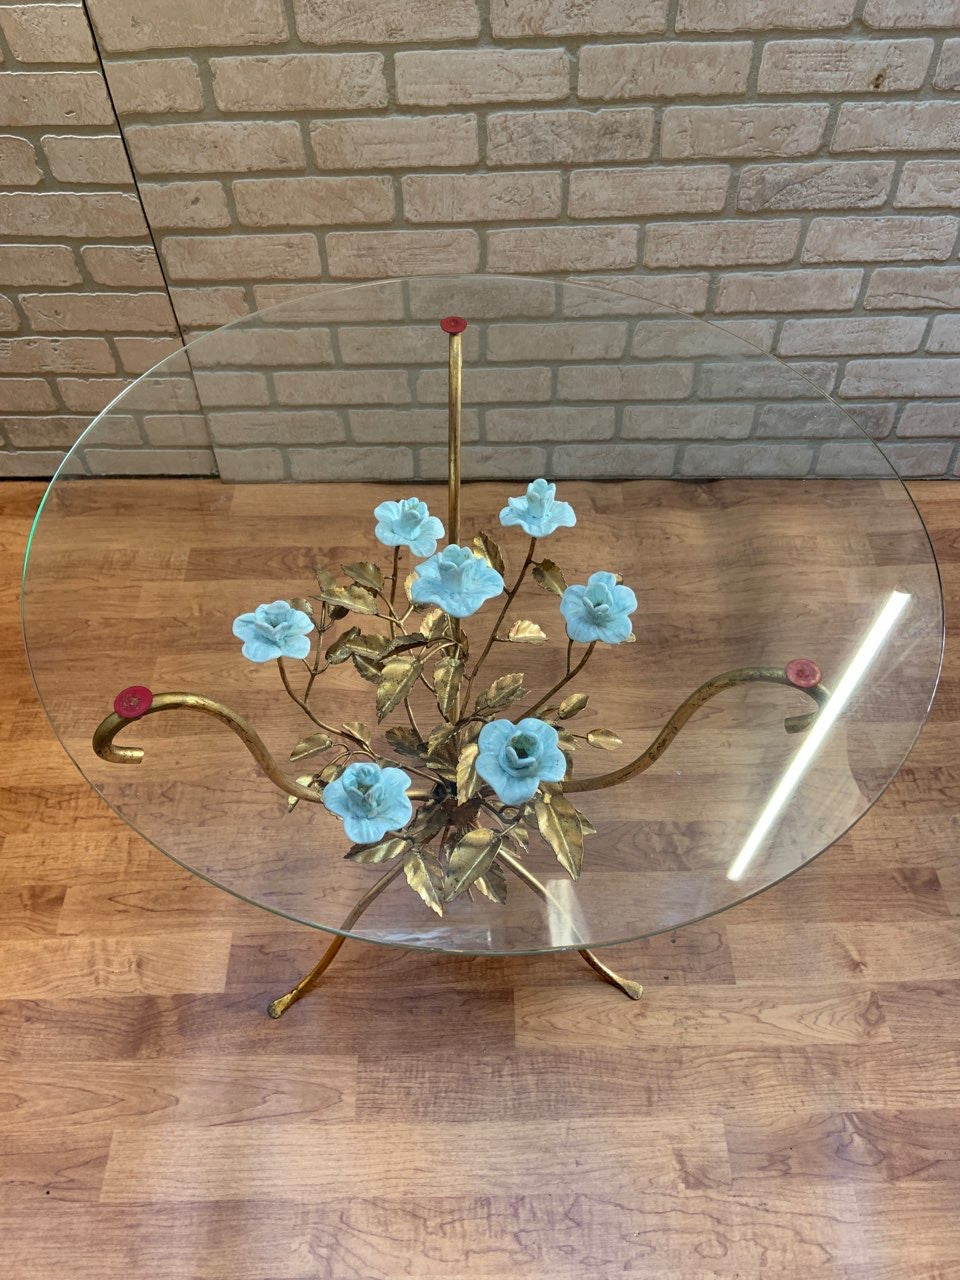 Hollywood Regency Murano Glass Side Table and Table Lamp Set with Gilded Leaves and Blue Flowers - 2 Piece Set